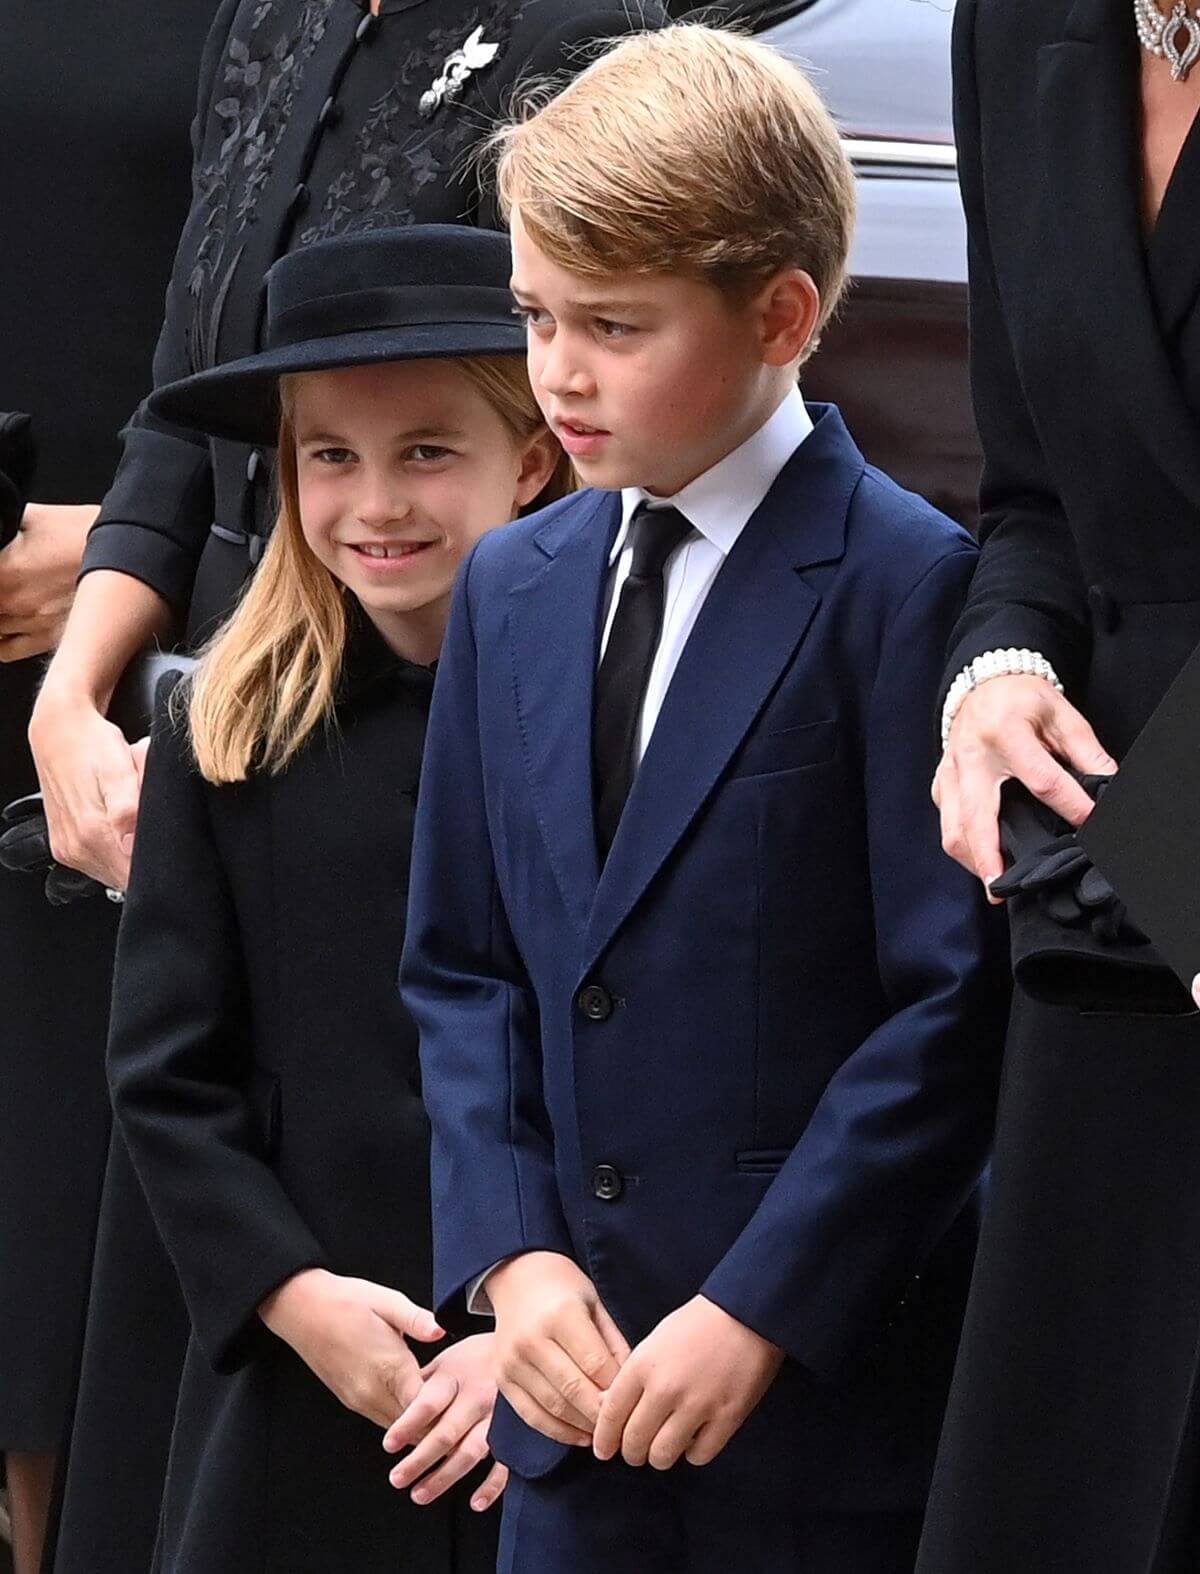 Princess Charlotte and Prince George arrive at Westminster Abbey for Queen Elizabeth II's funeral